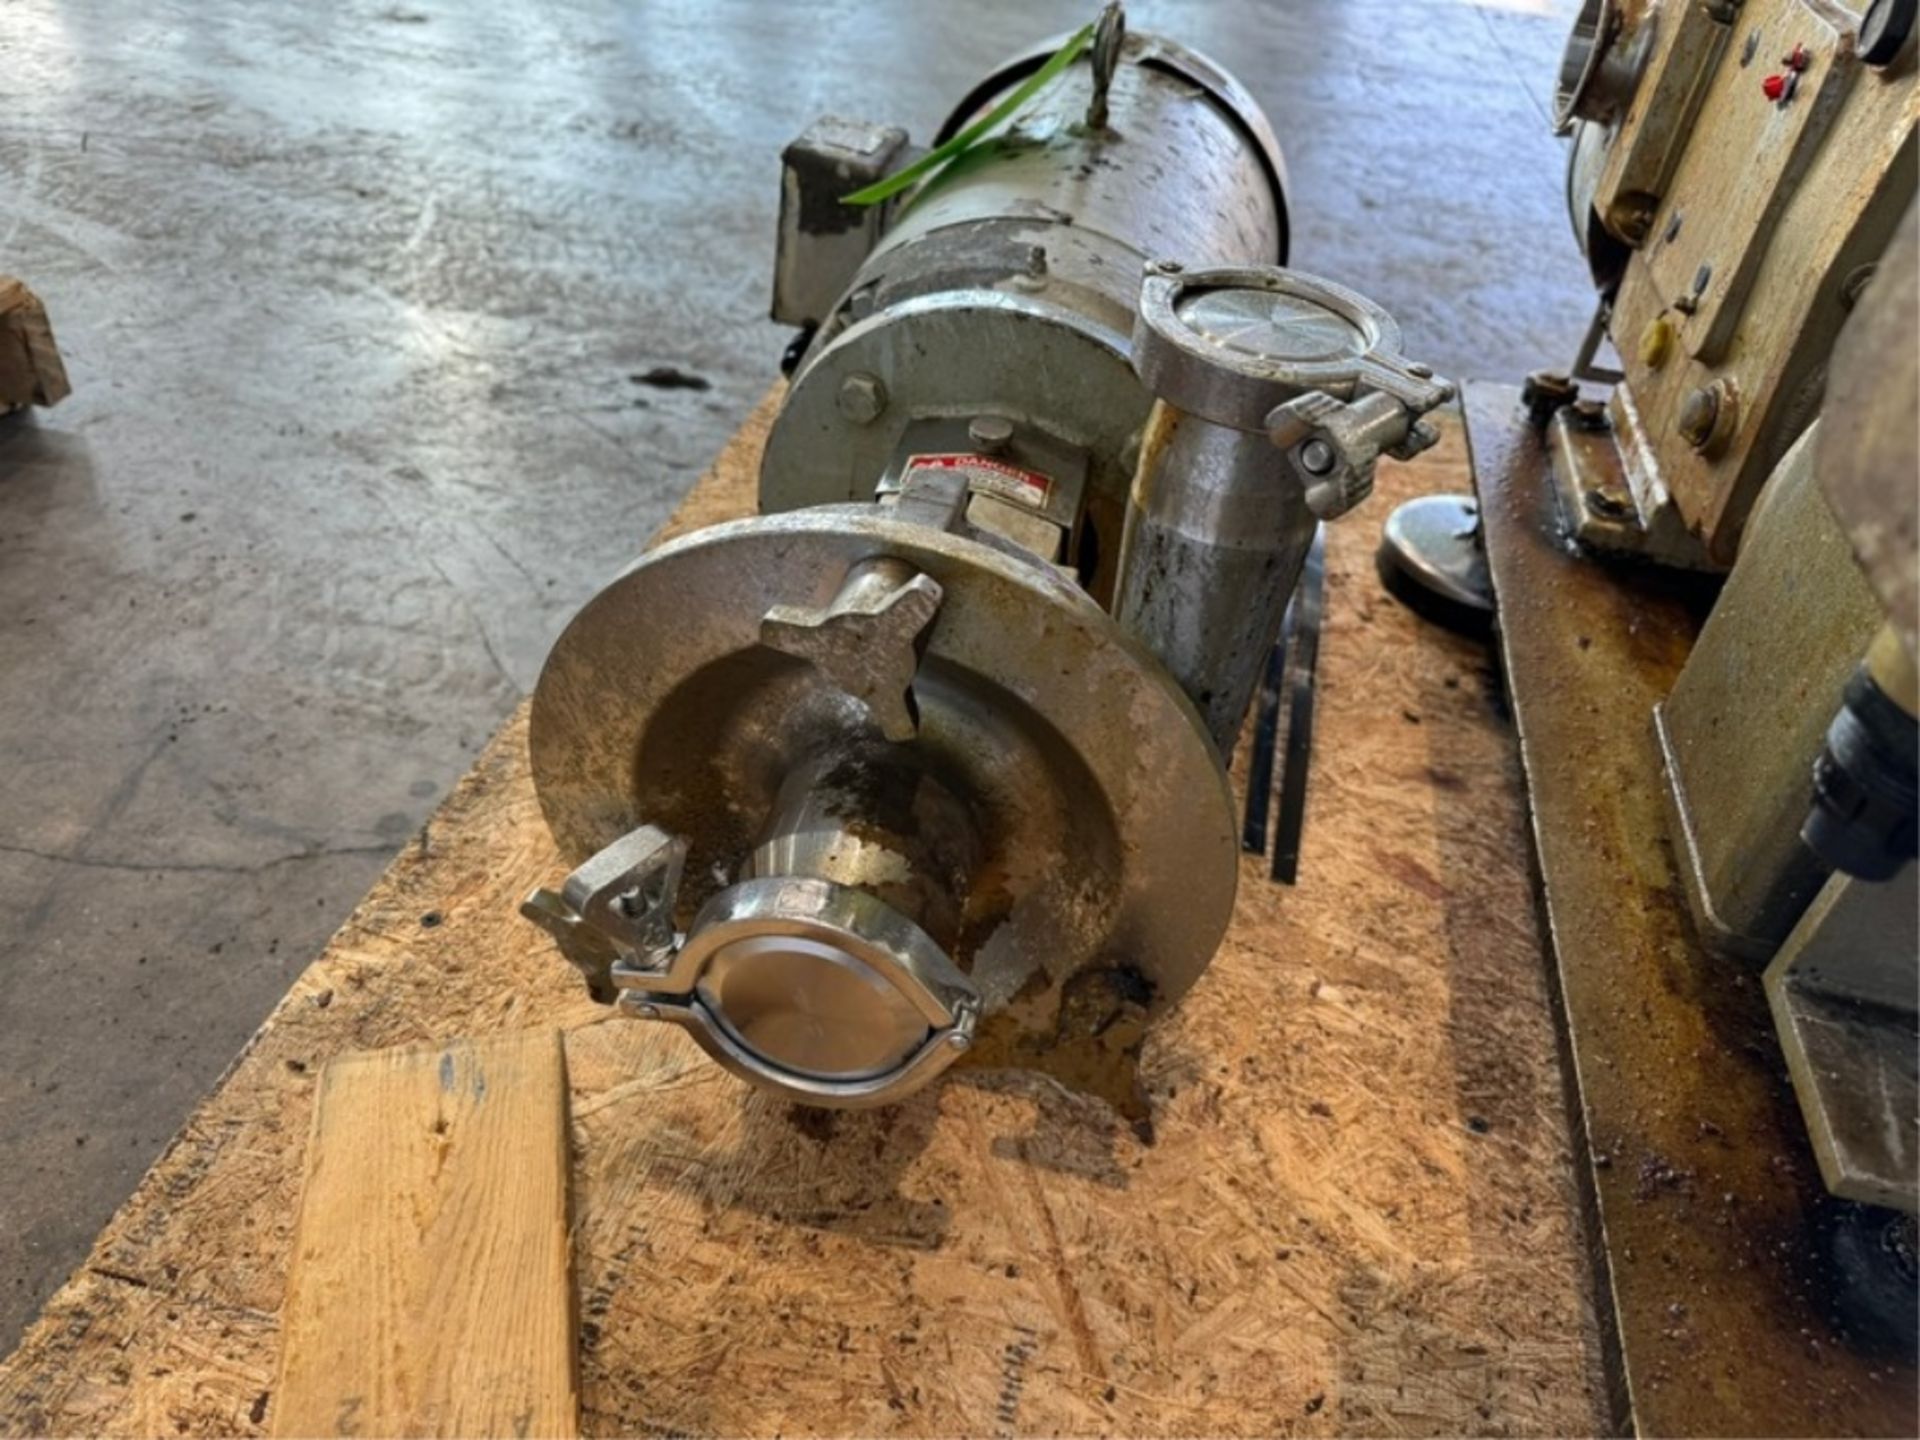 Fristam 15 hp Centrifugal Pump, M/N FPX3532-140, S/N FPX35320200975, with Aprox. 2-1/2" x 3" Clamp - Image 3 of 5